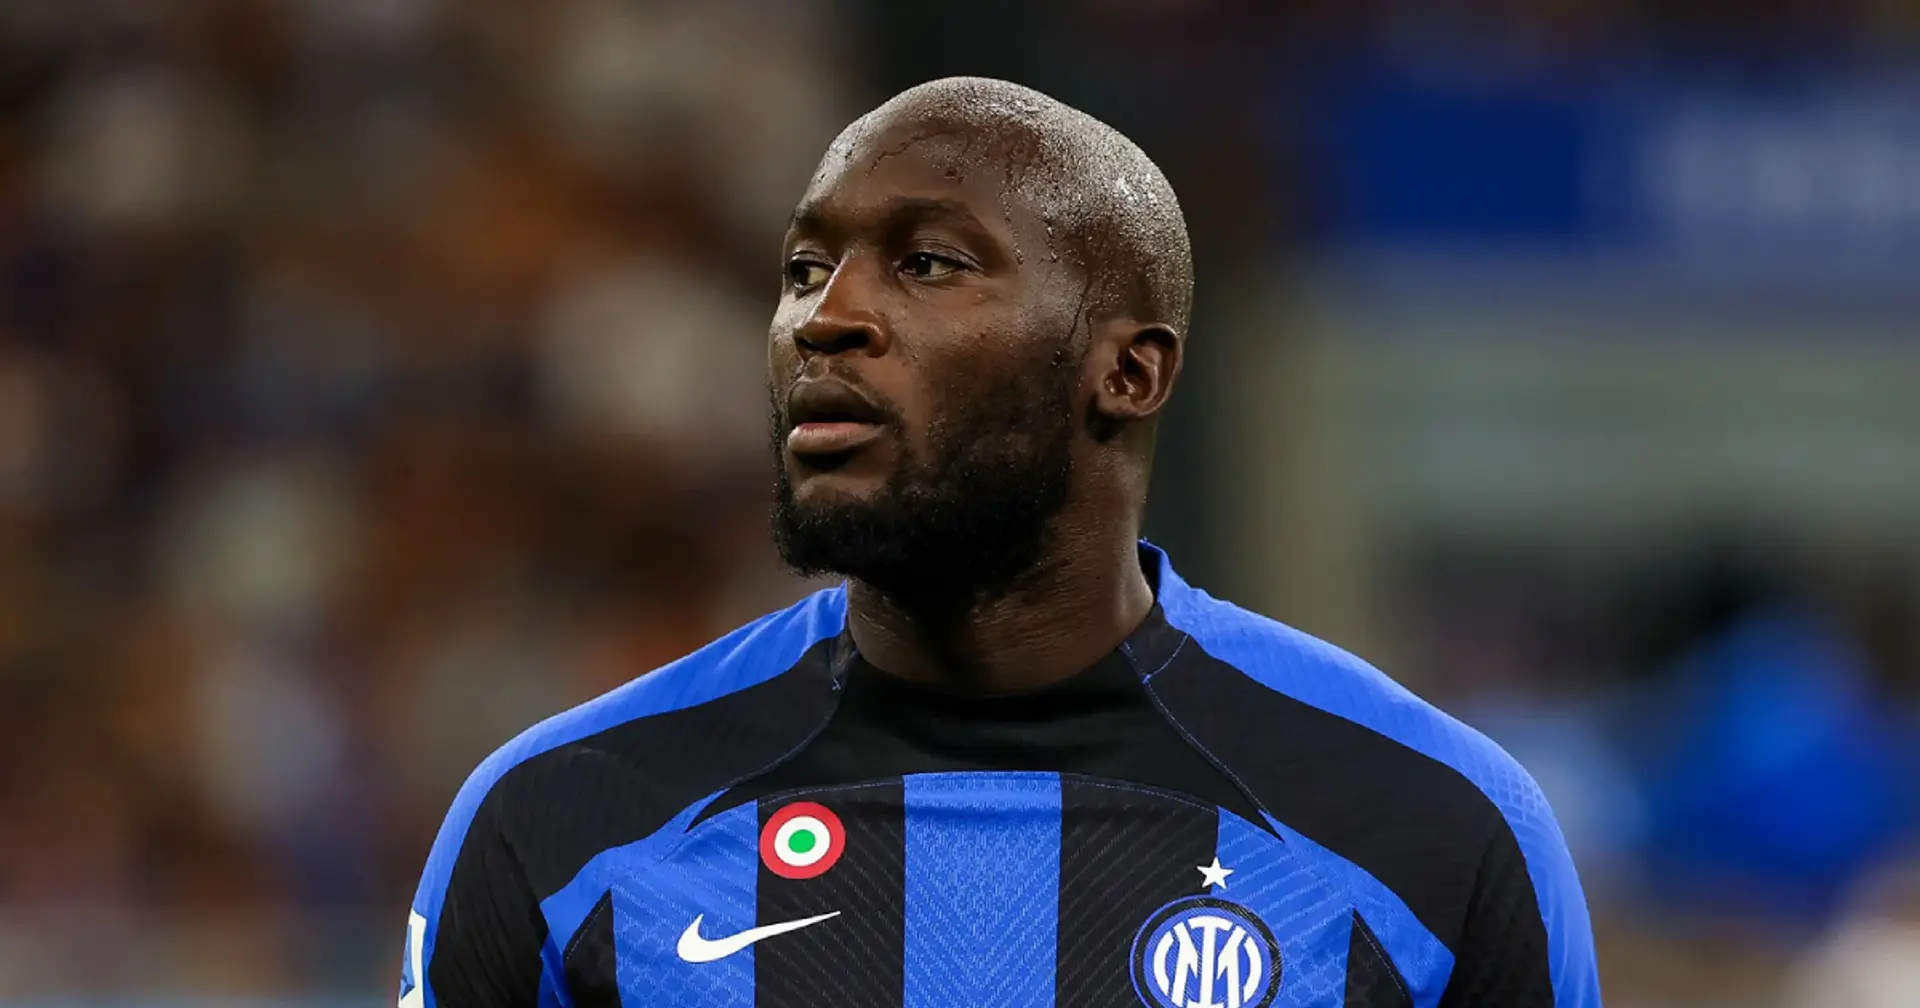 Chelsea want to sell Lukaku, hope for good World Cup to boost his value (reliability: 4 stars)